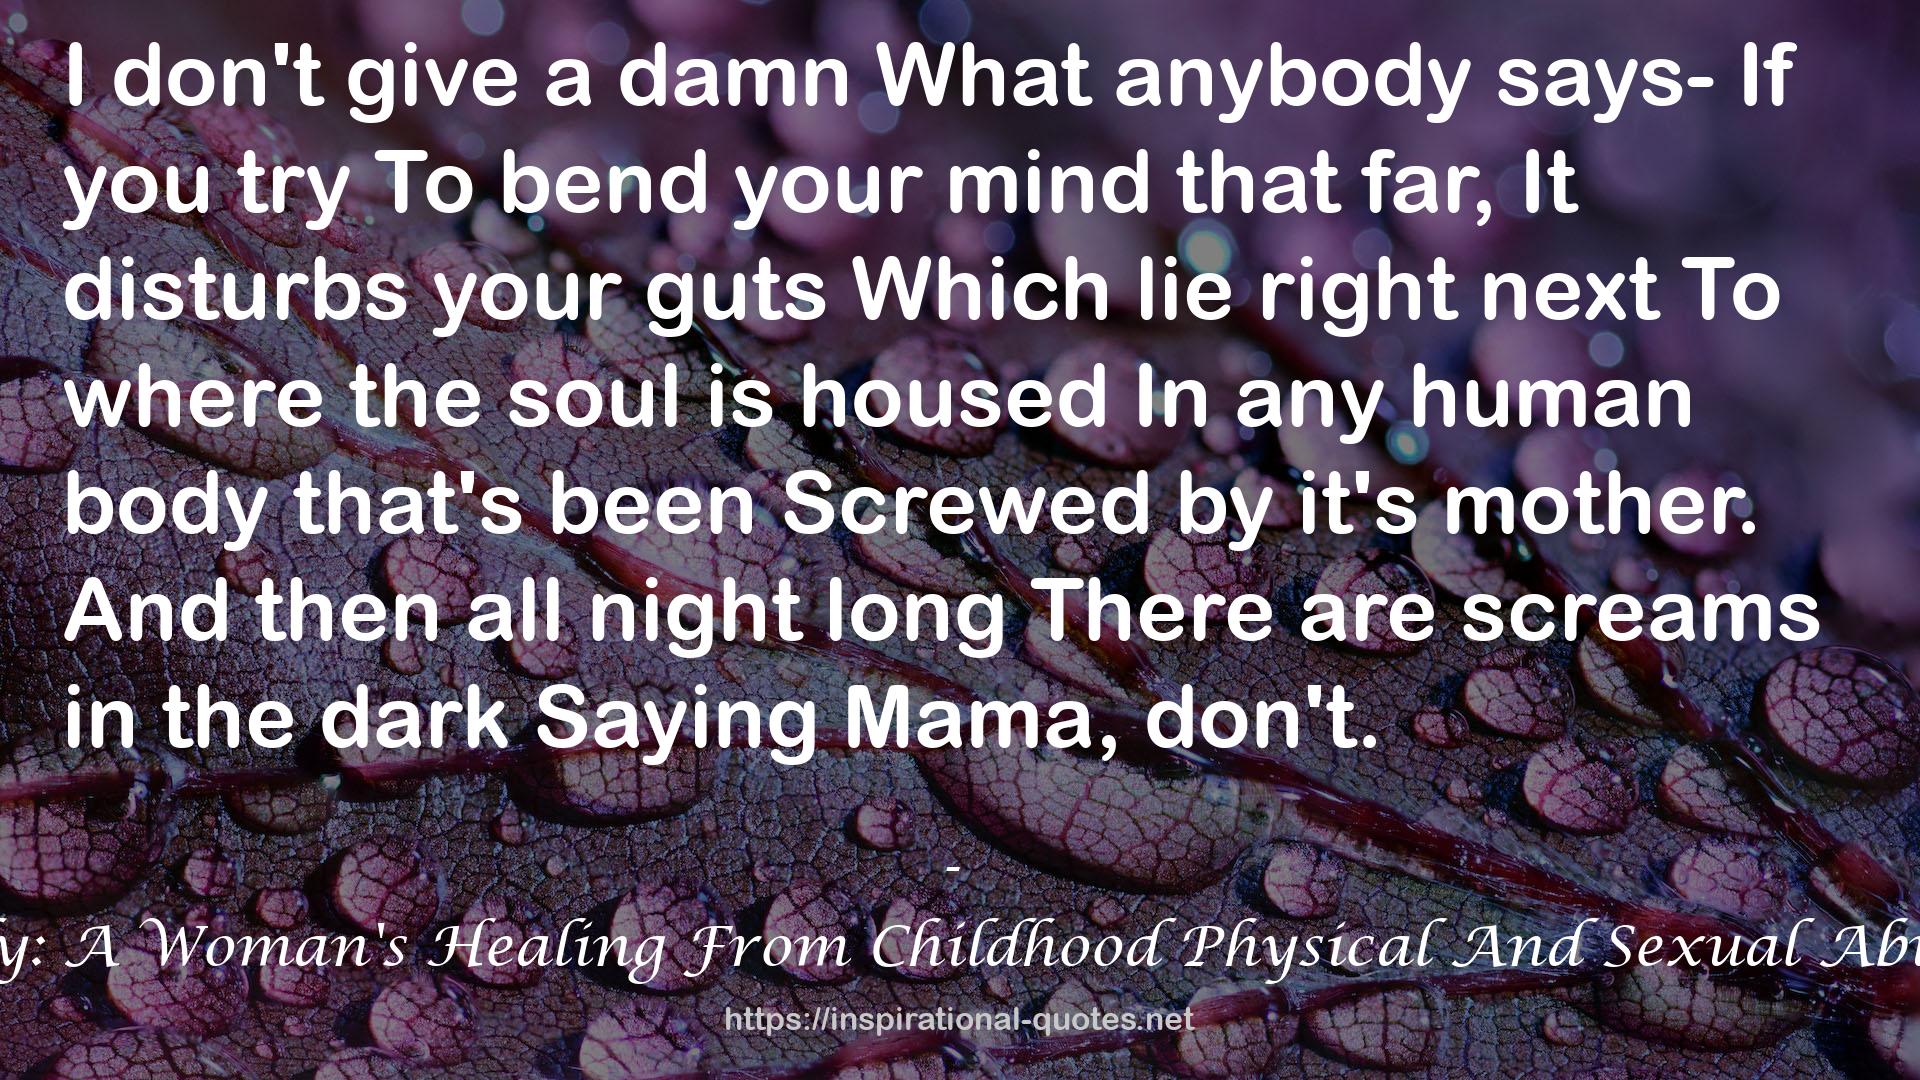 When You're Ready: A Woman's Healing From Childhood Physical And Sexual Abuse By Her Mother QUOTES